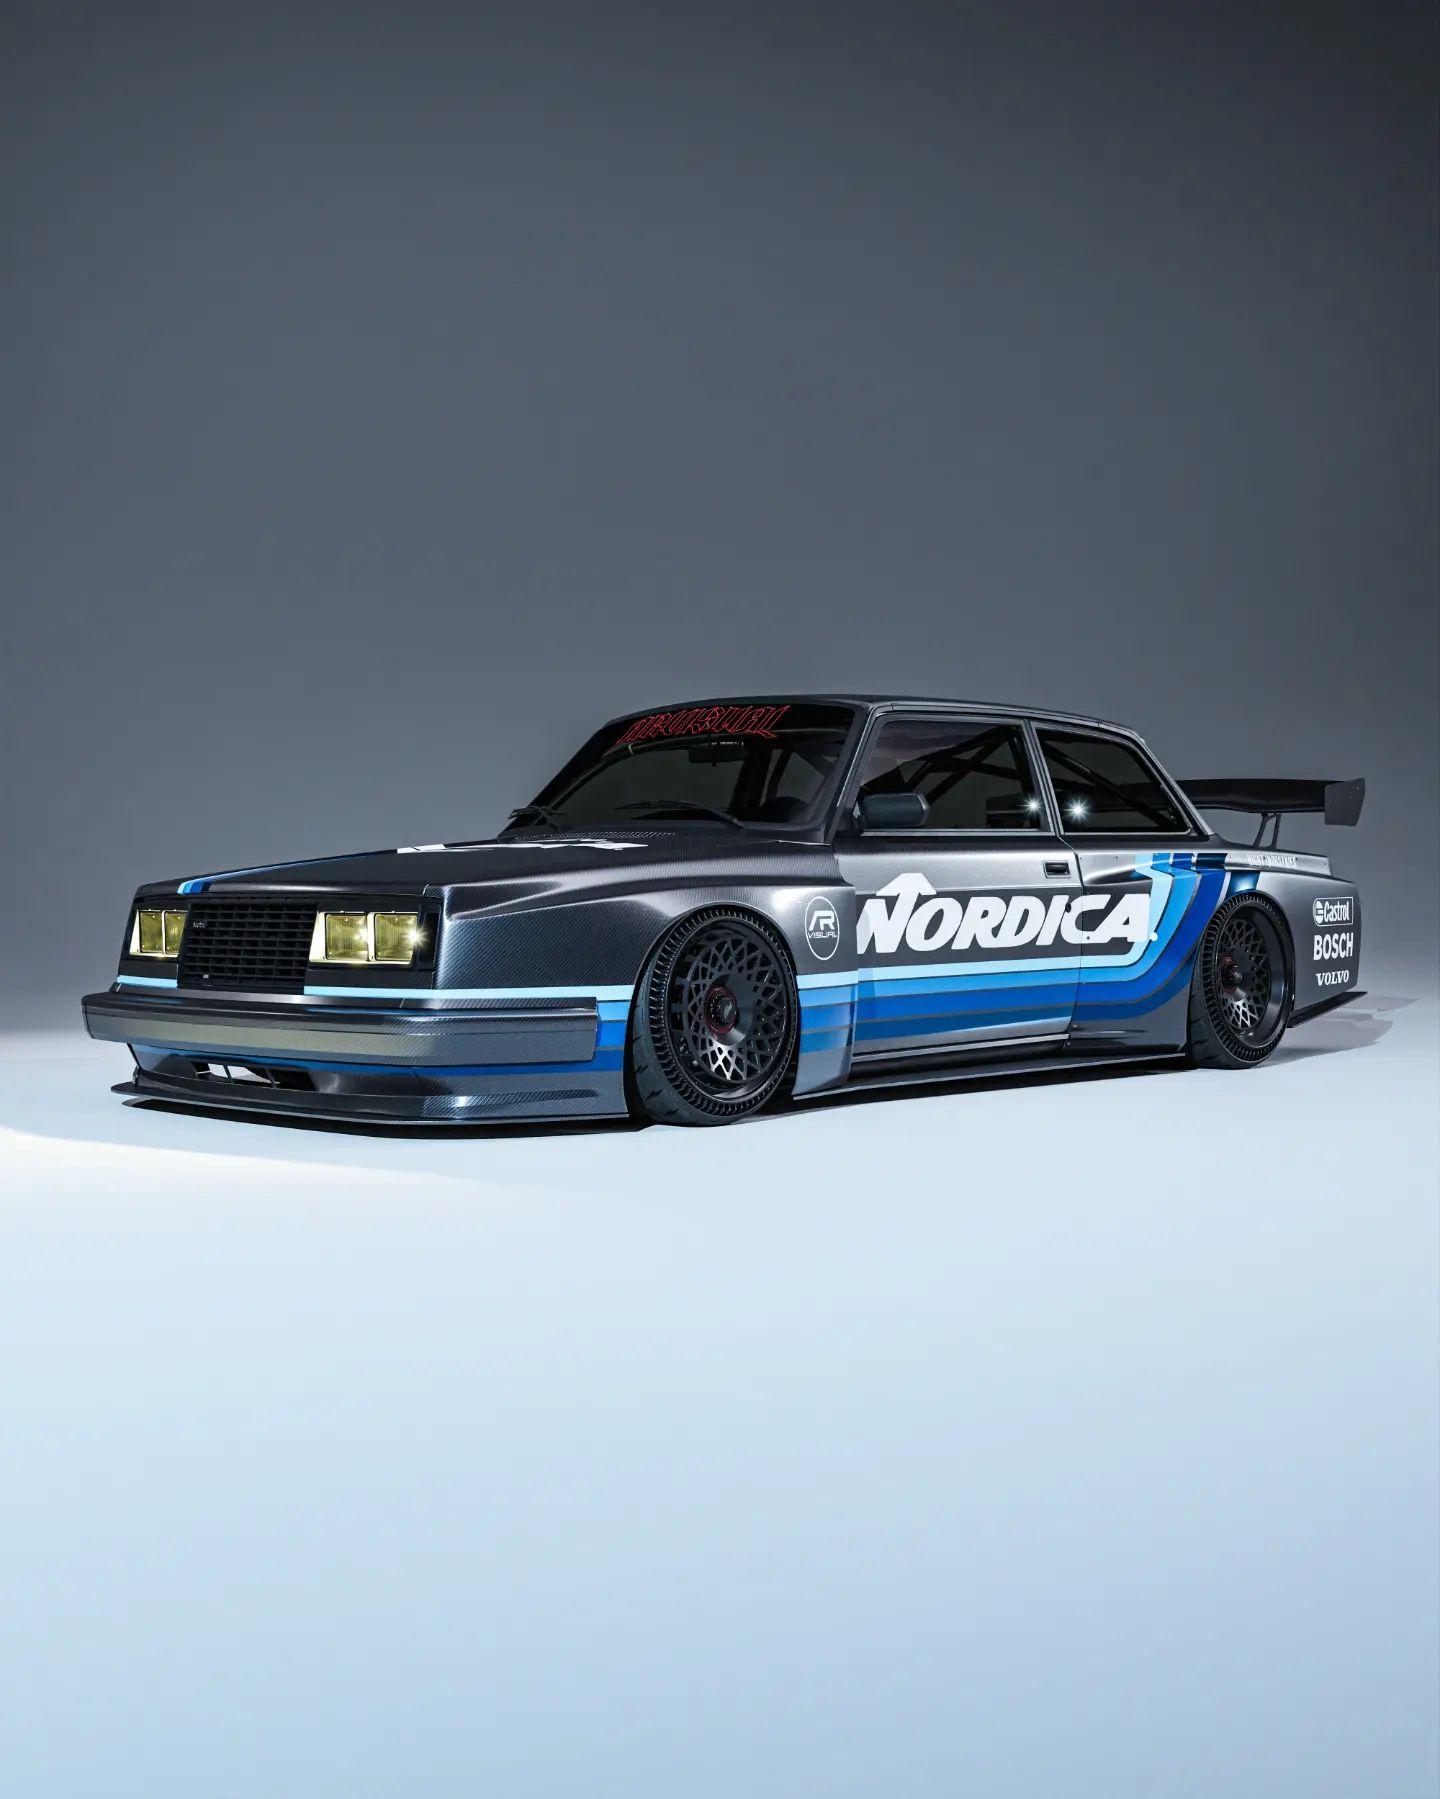 Slammed Widebody Lightweight Volvo Turbo Is Envisioned As A